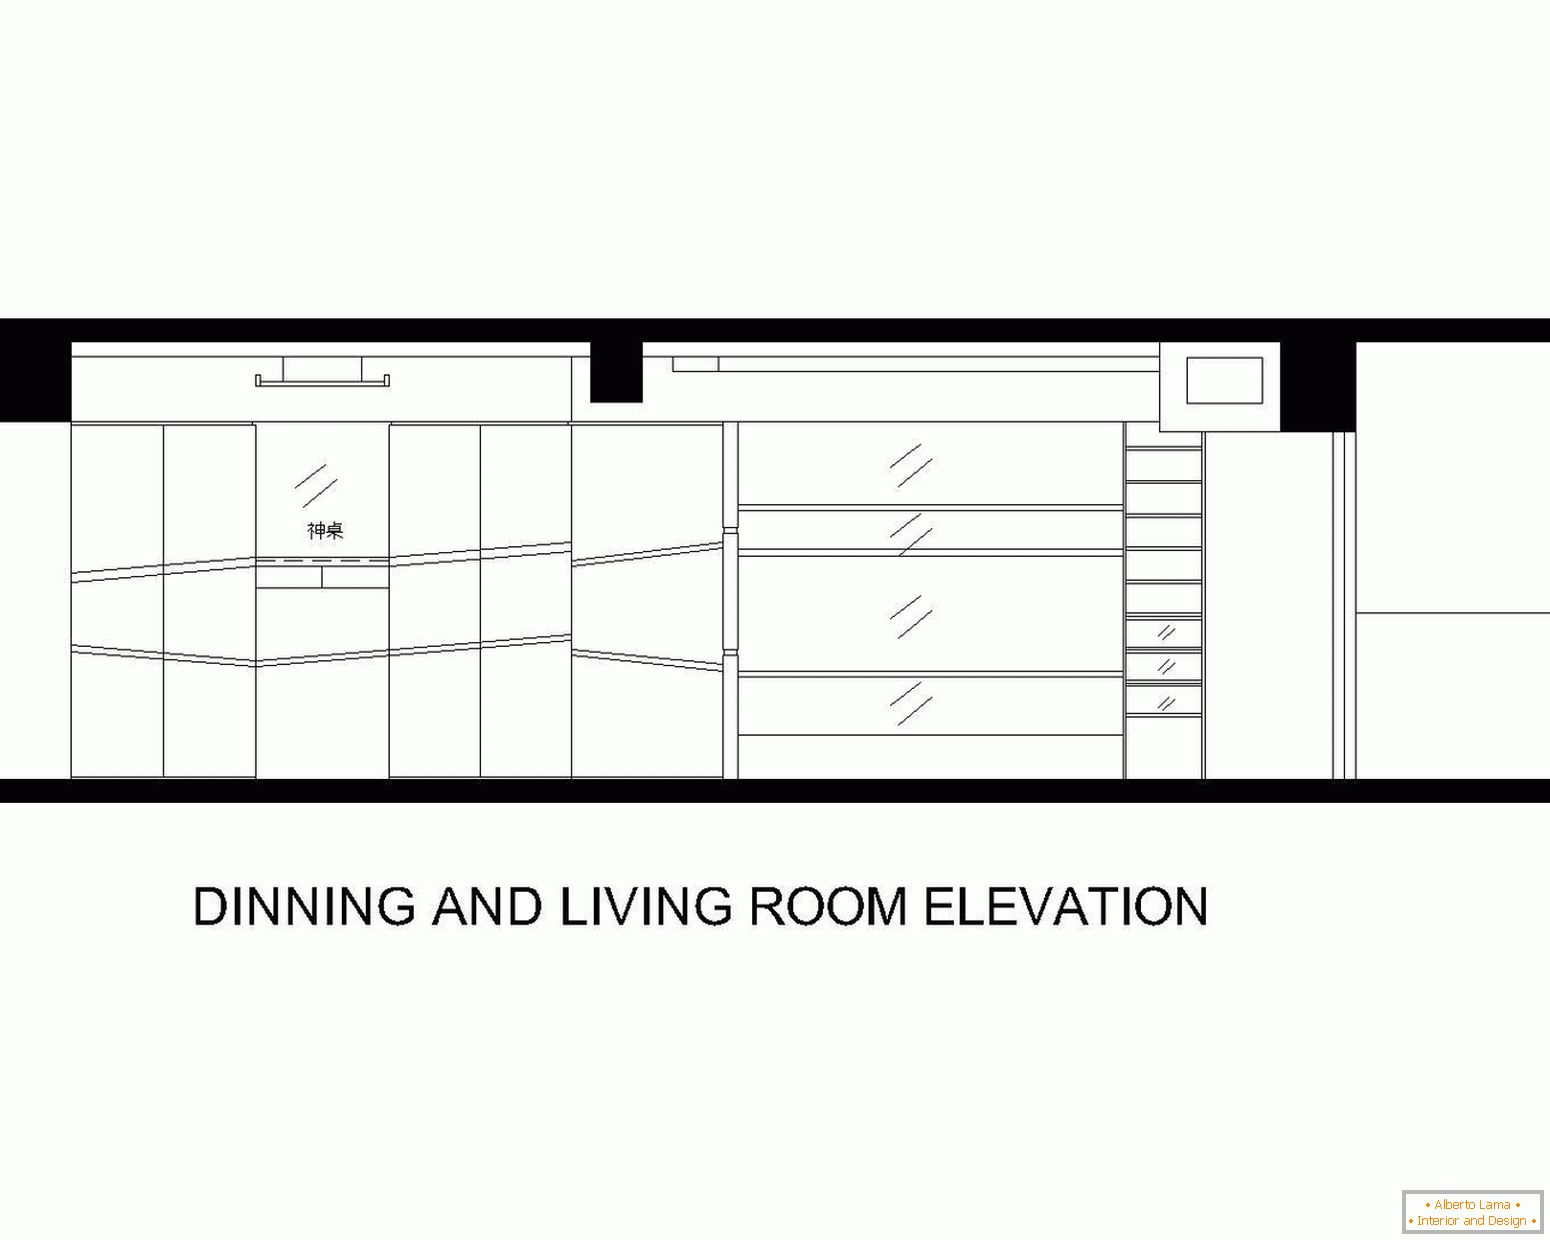 Plan of dining room and living room